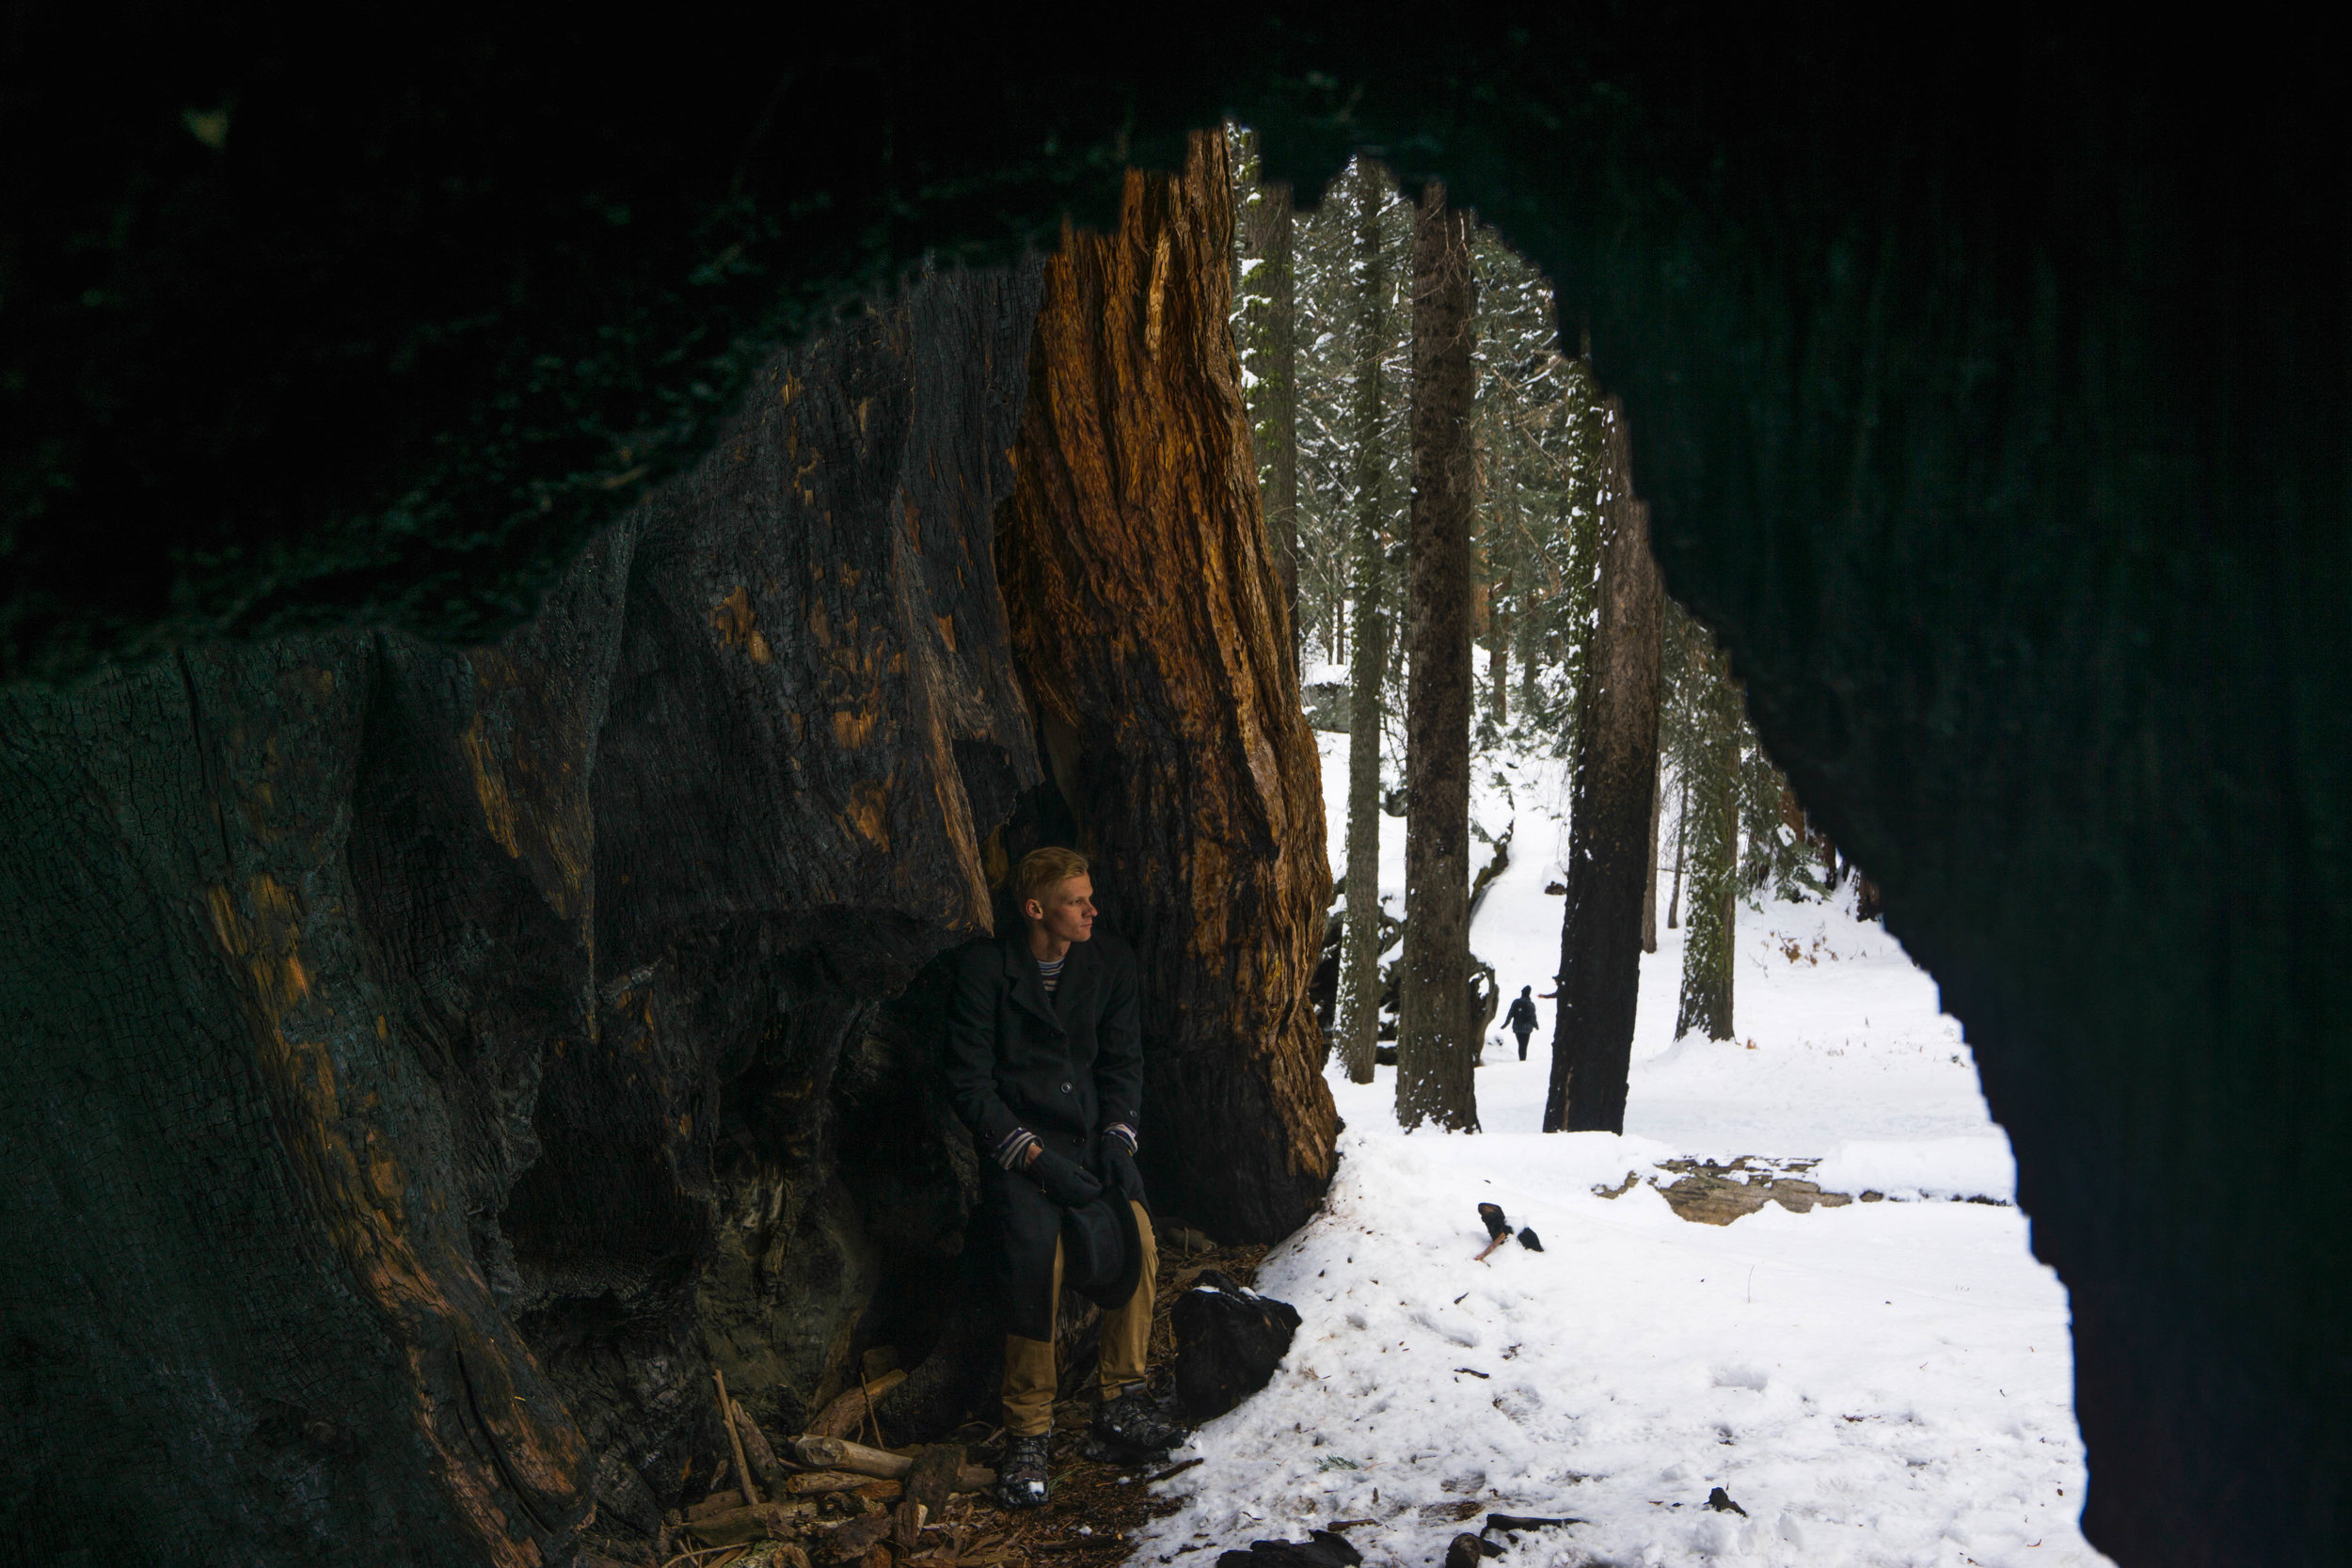 Inside the two trees we once again feel completely dwarfed.